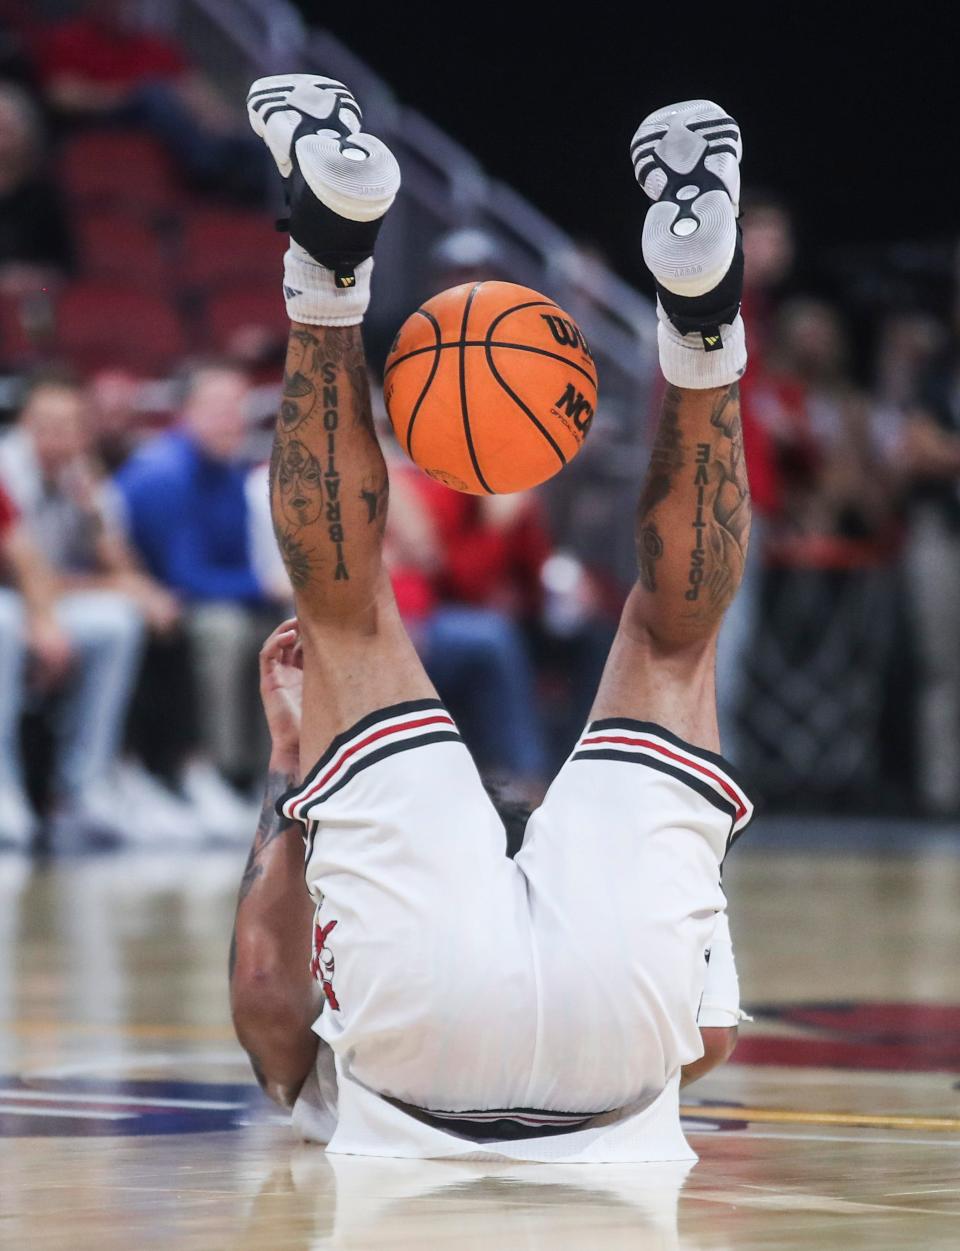 Louisville guard Skyy Clark gets upended during the second half. Clark had 10 points and five rebounds Wednesday night.